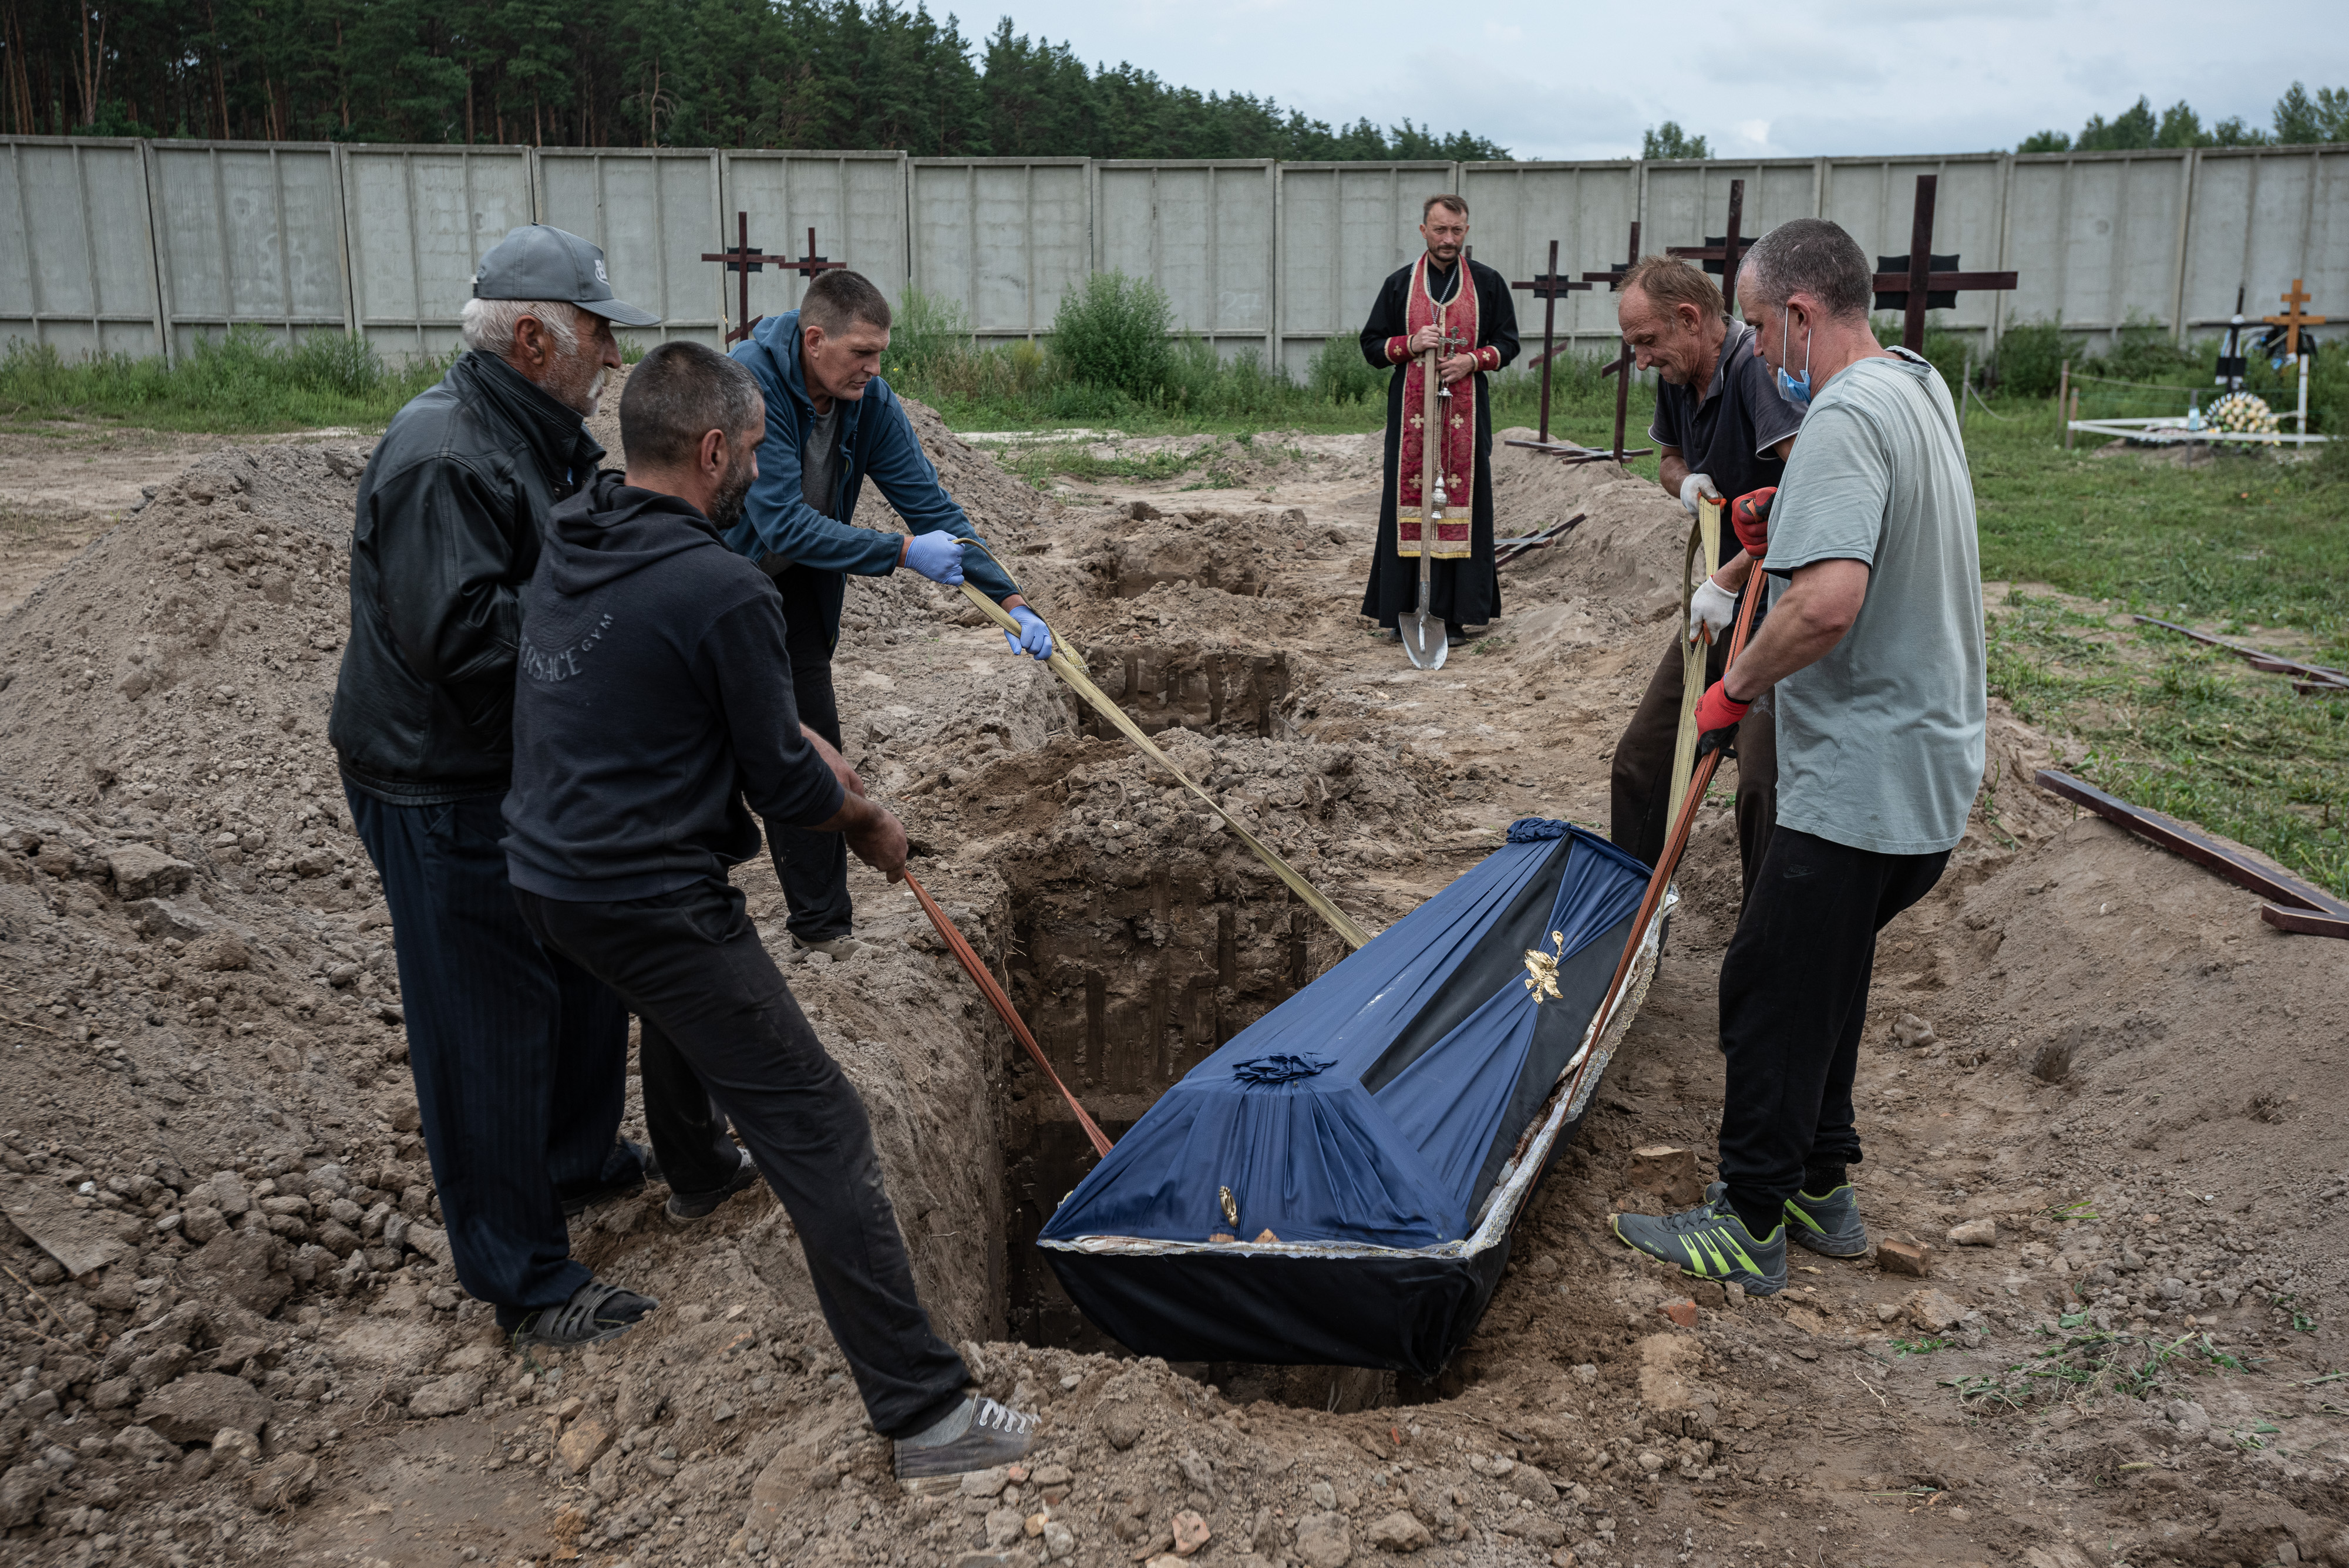 Months after Russian withdrawal, Bucha buries bodies of unidentified victims (PHOTOS)